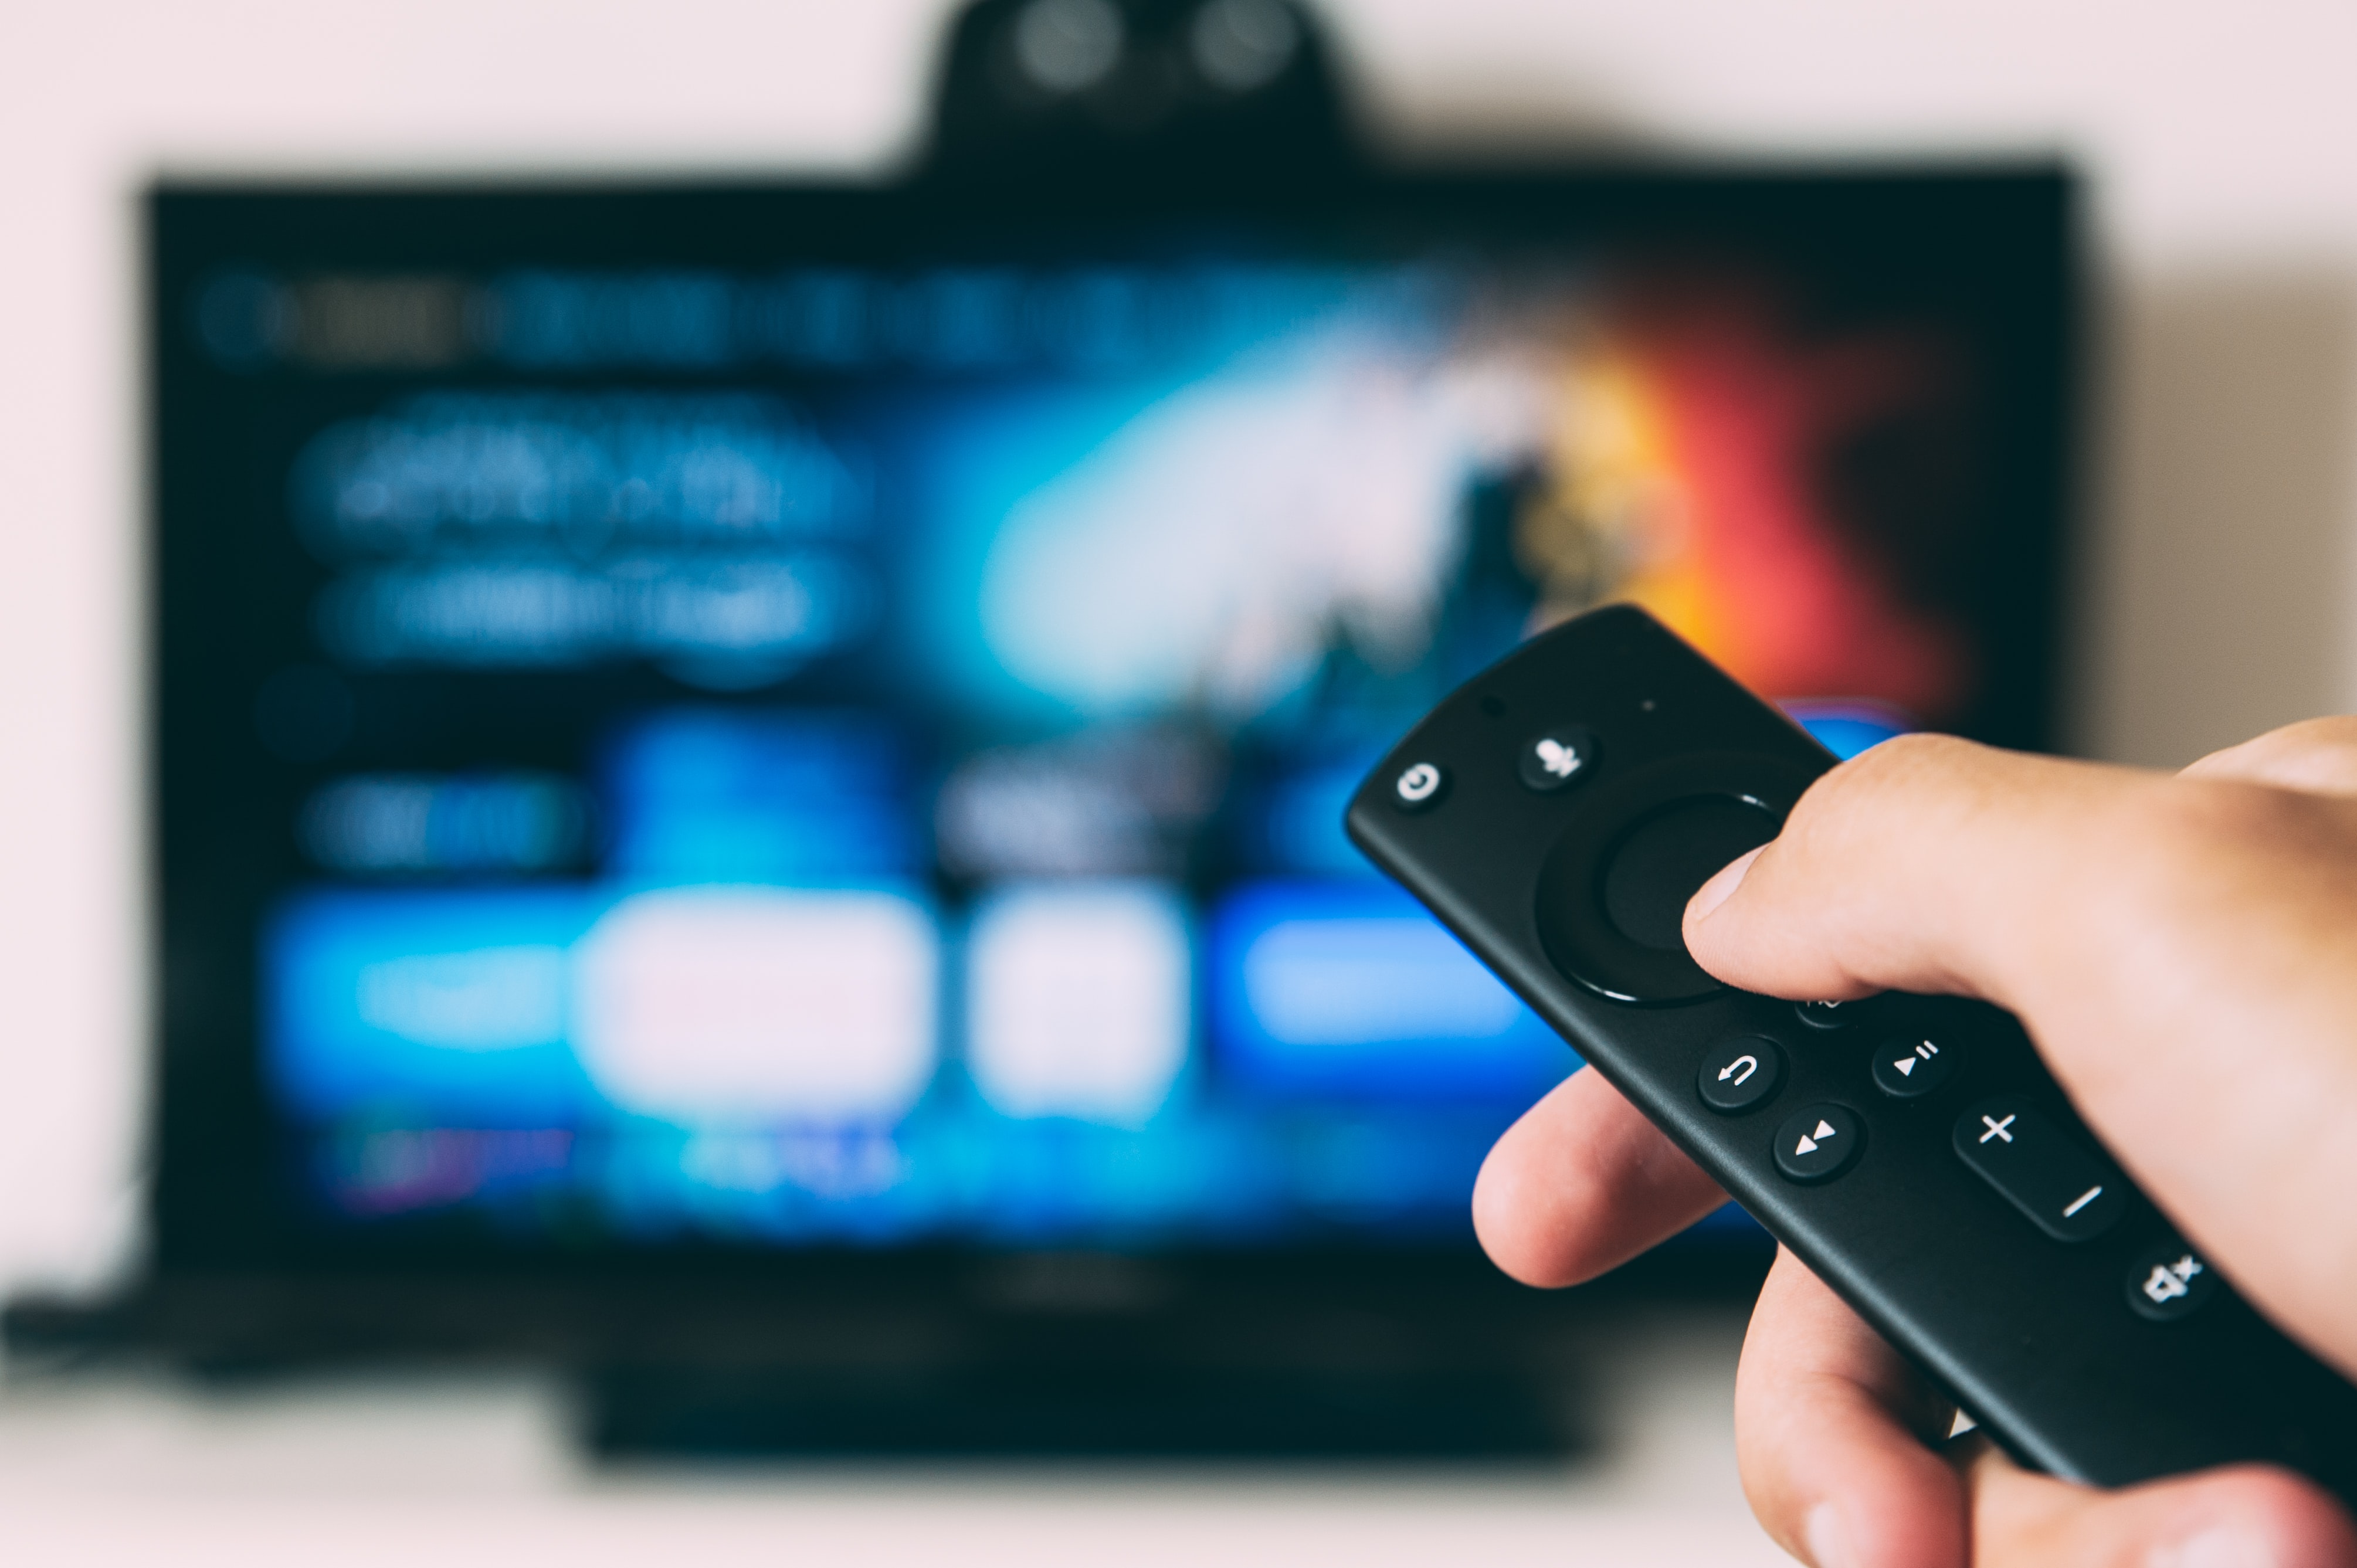 A hand holds up a remote in front of a large television screen, blurred in the background.